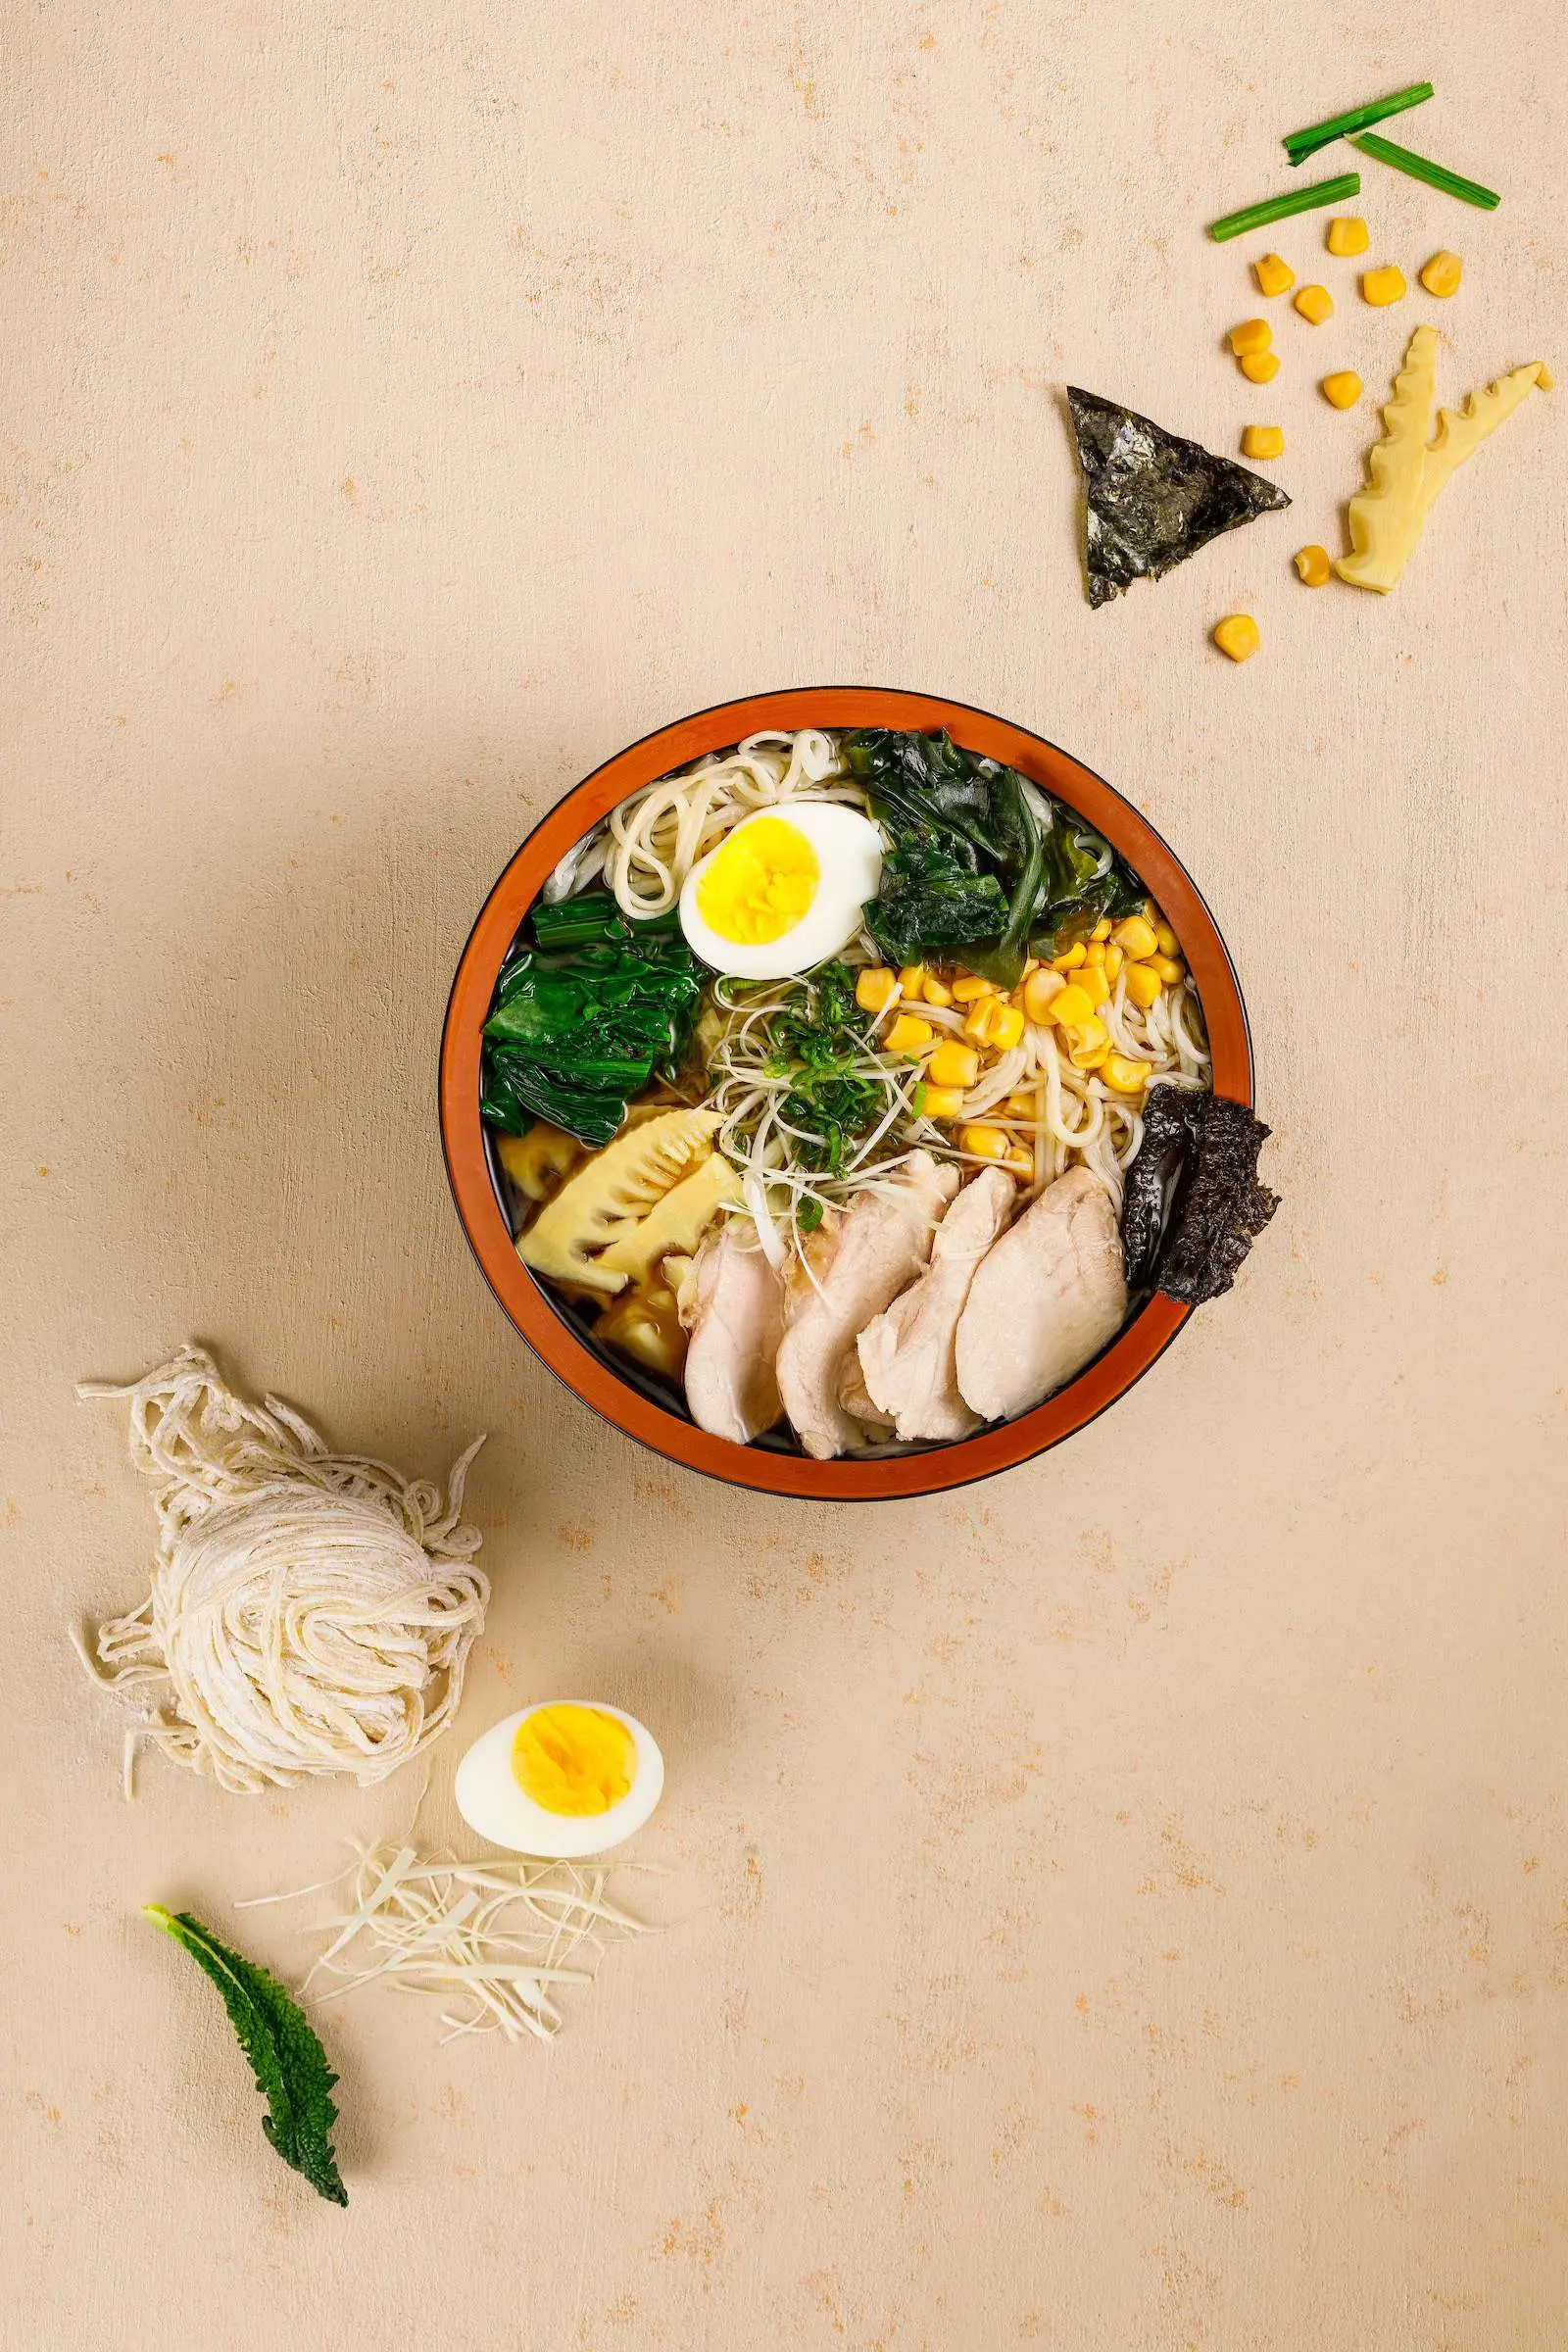 A bowl of ramen with eggs and vegetables on a beige background.